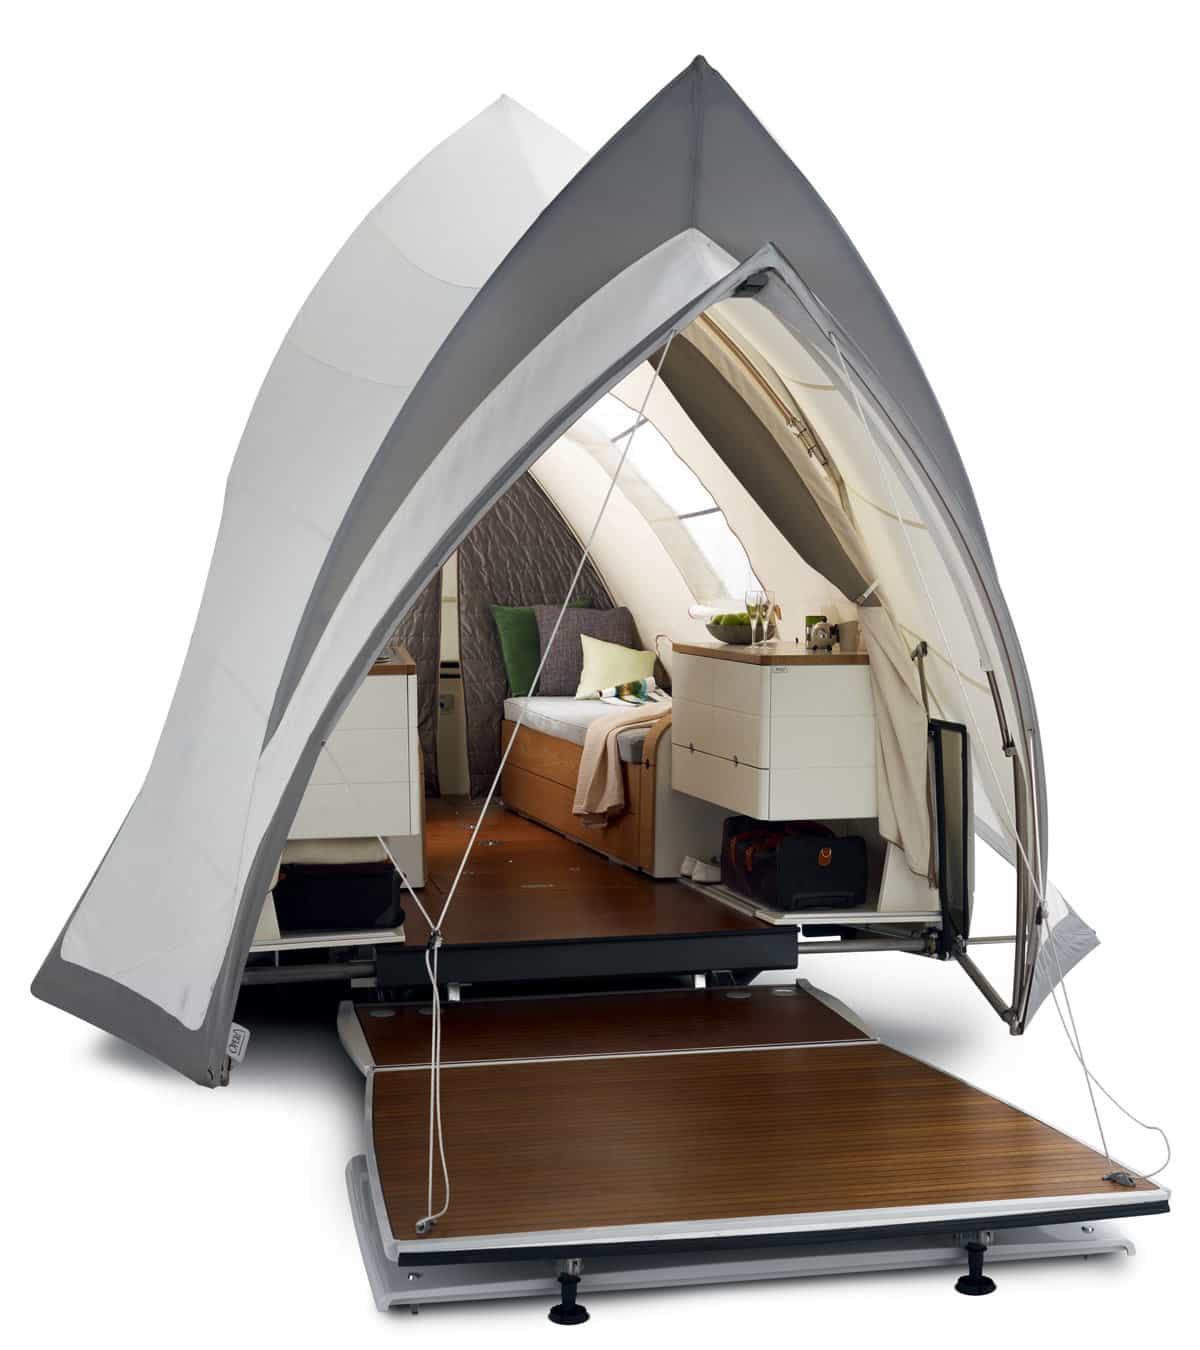 The opera camper is literally a private suite on wheels